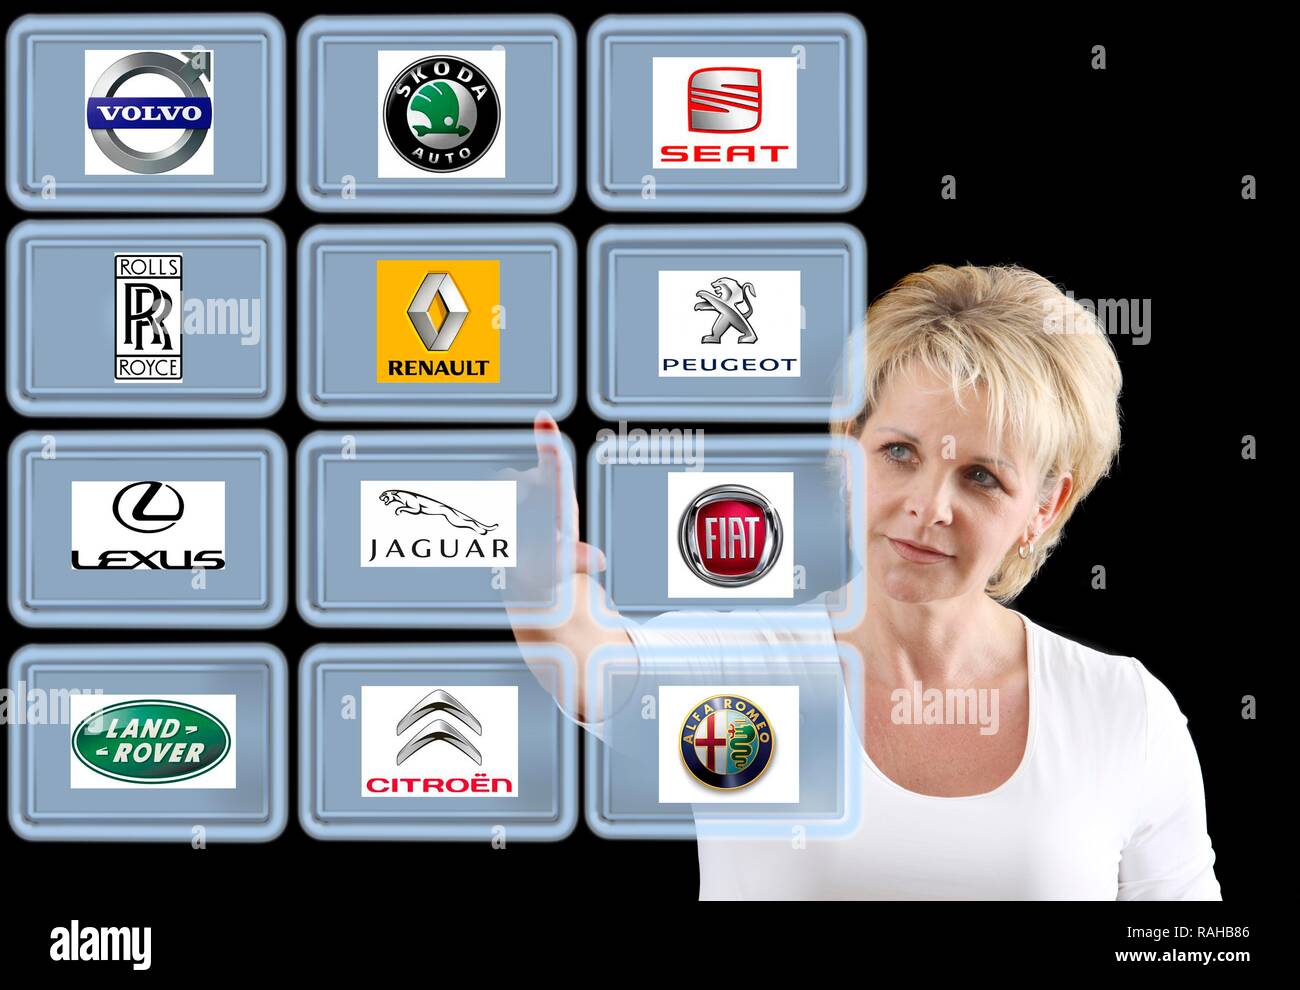 Woman working with a virtual screen, touch screen, European car brands Stock Photo